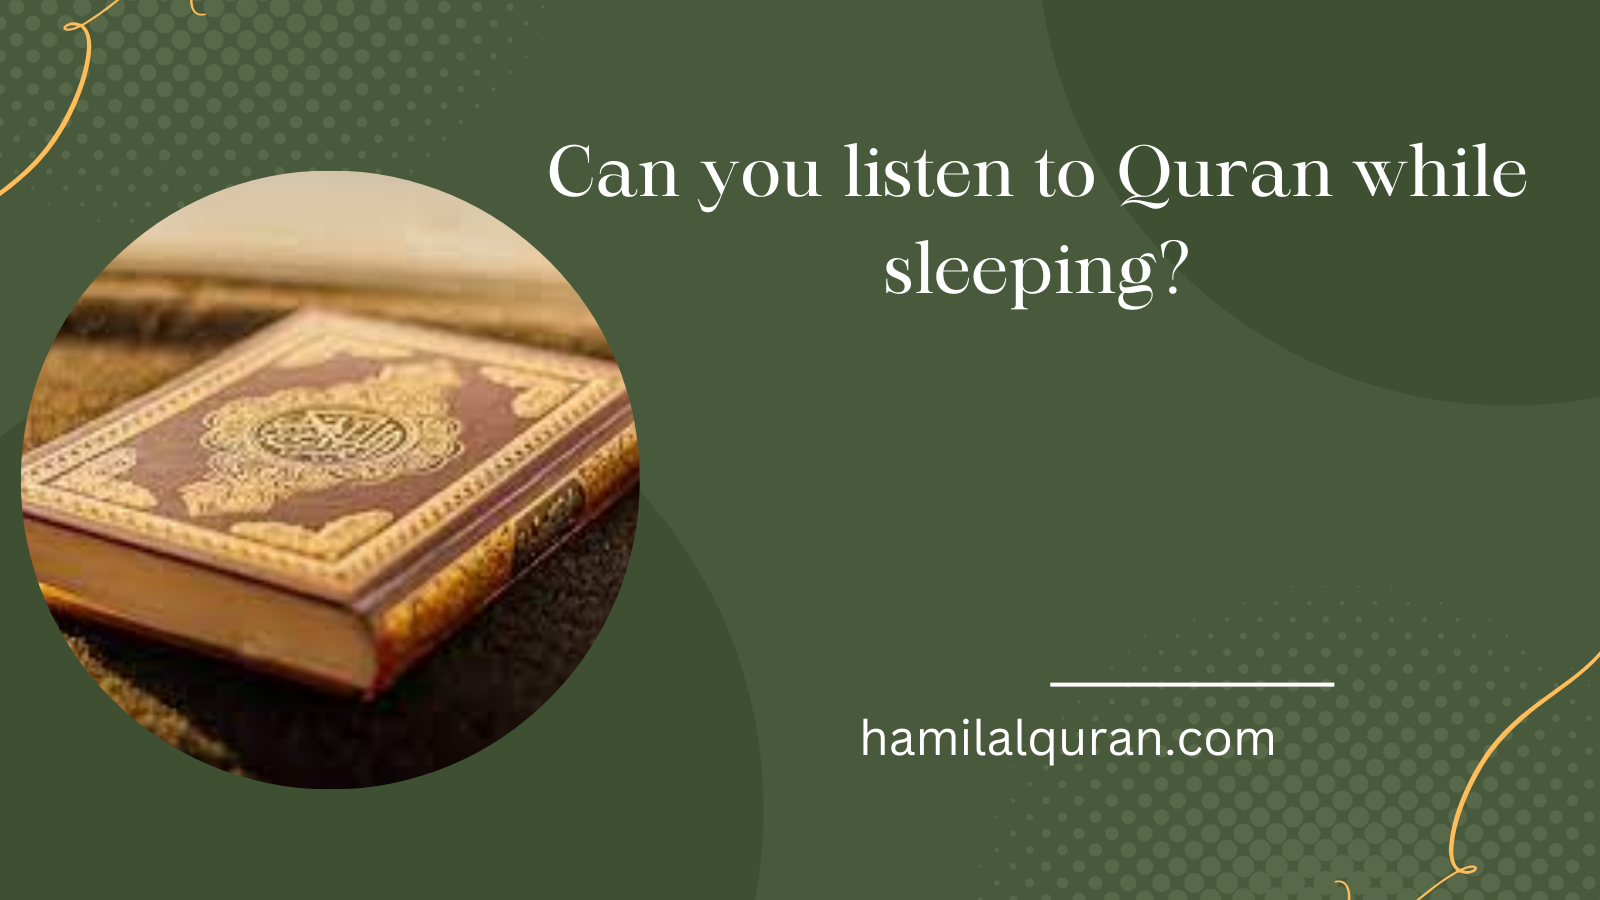 Can you listen to Quran while sleeping?